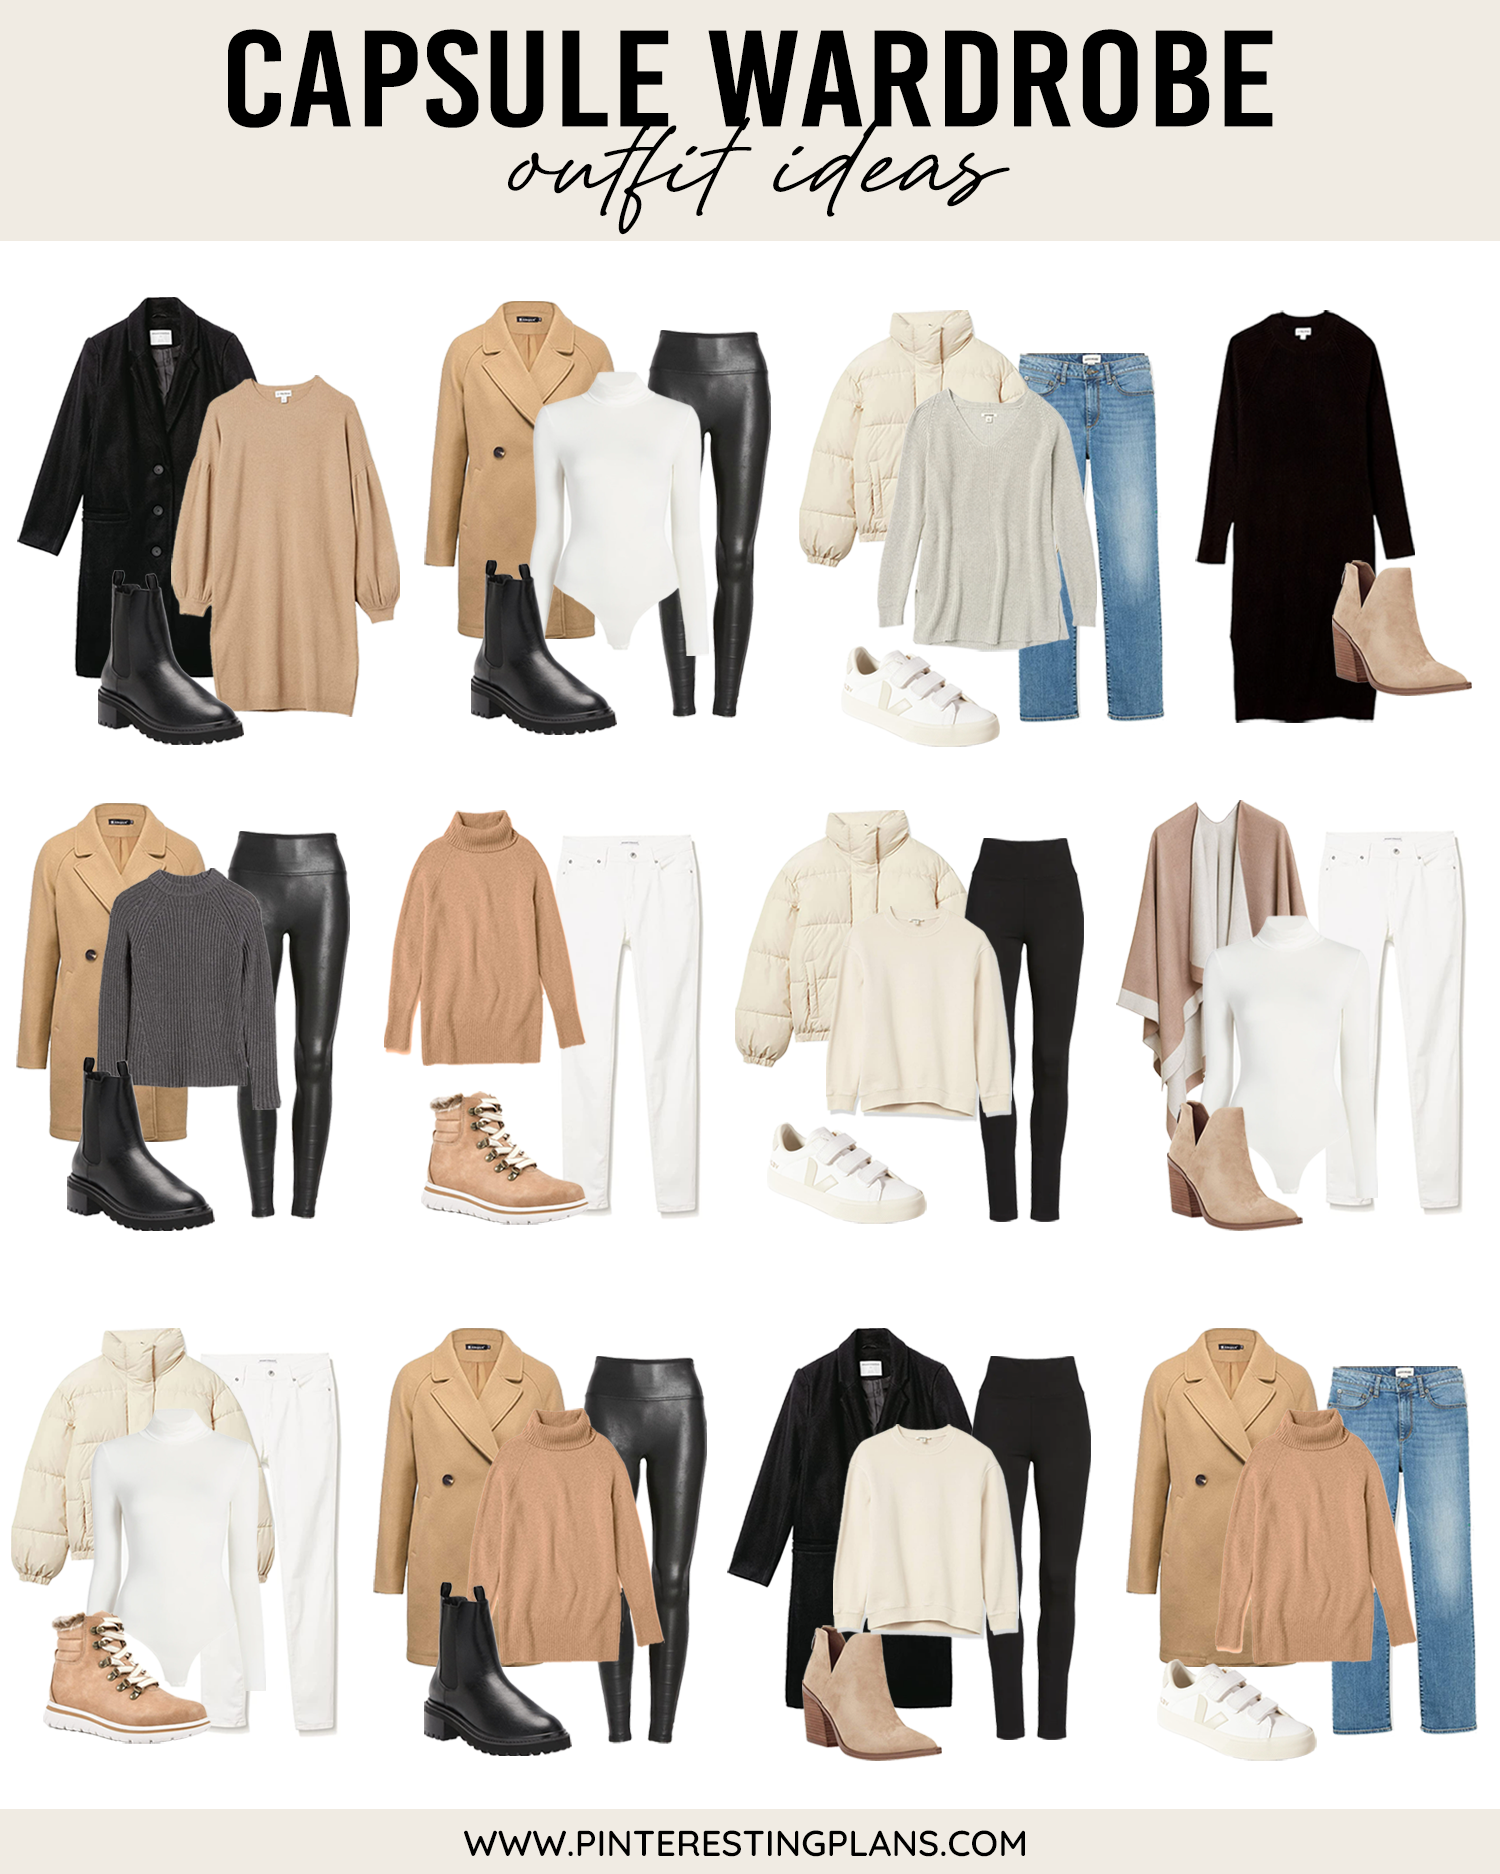 pinteresting-plans-winter-capsule-wardrobe-outfit-ideas-2021 ...